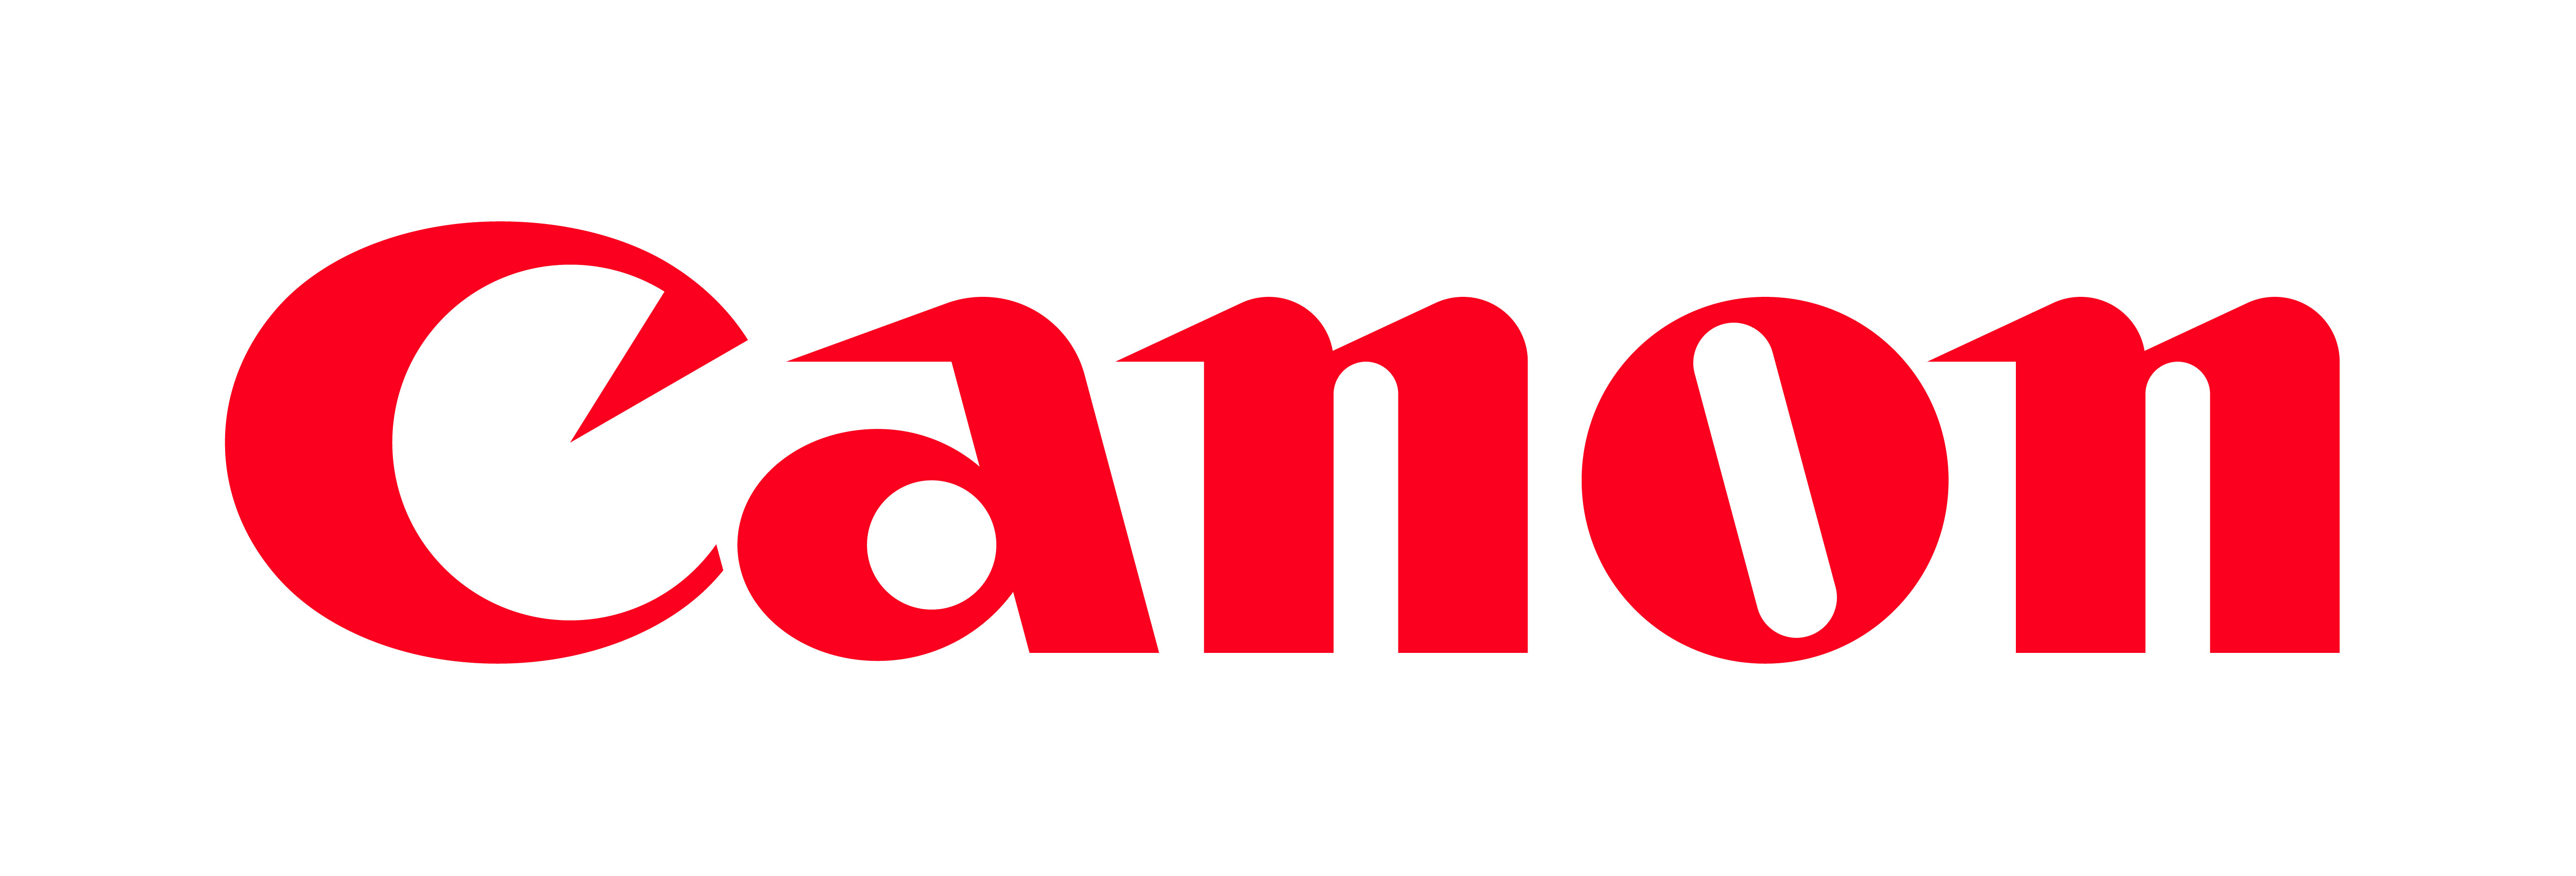 Canon Logo PNG